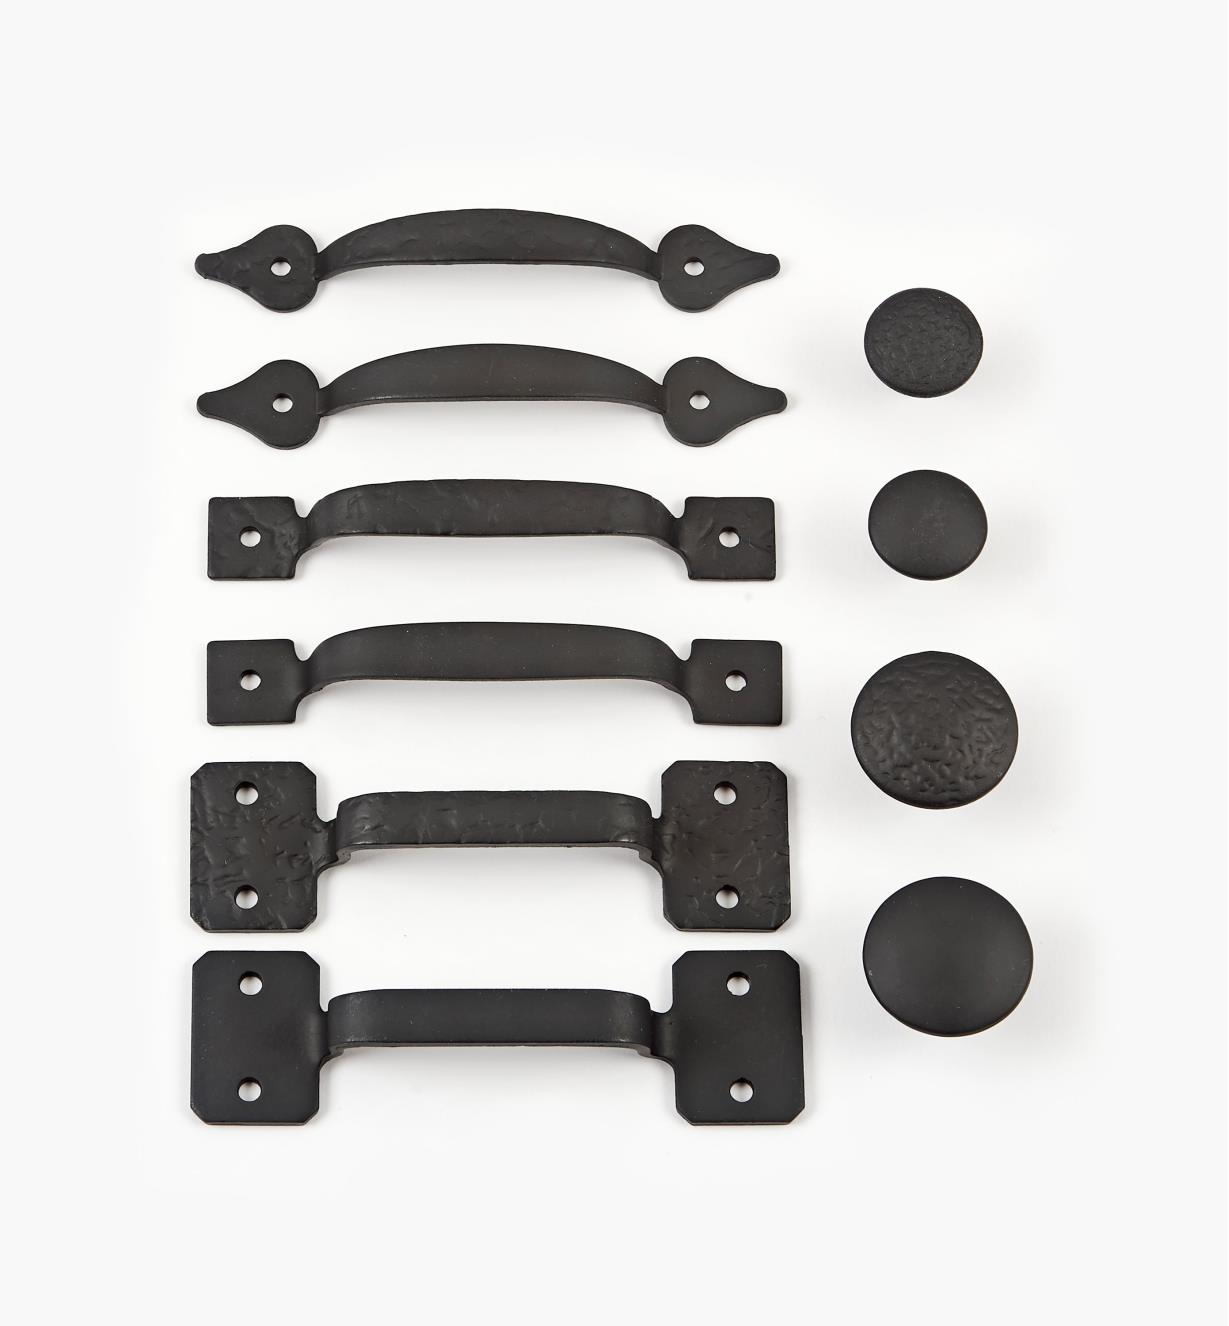 Latest Lee Valley Garage Door Hardware for Small Space